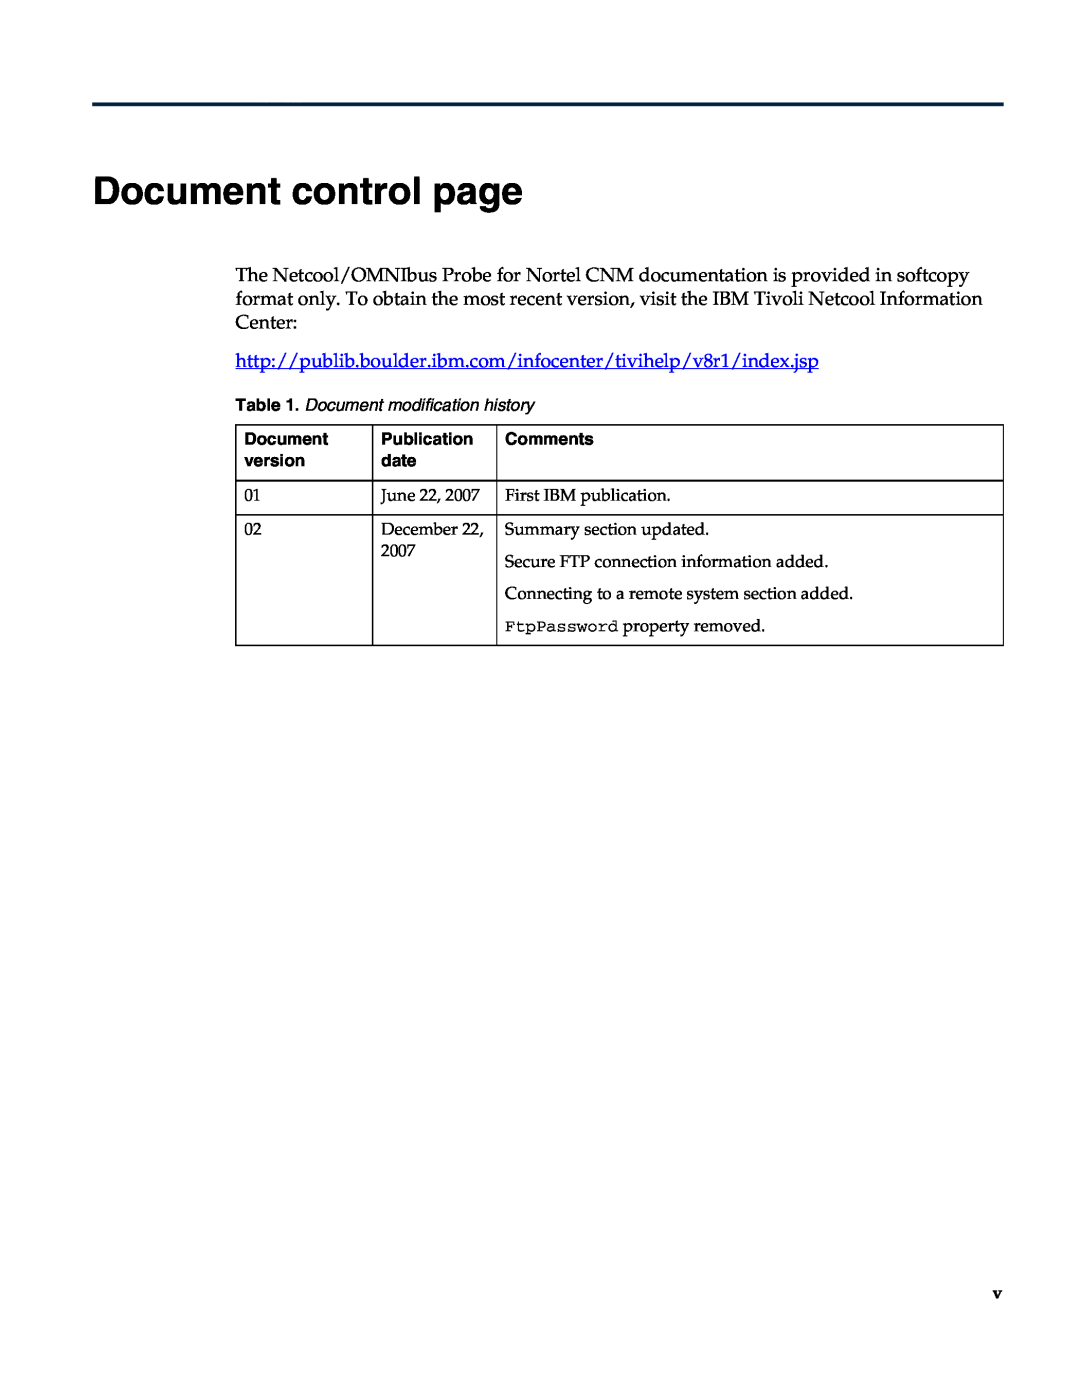 IBM Netcool/OMNIbus Probe for Nortel CNM Document control page, Document modification history, Publication, Comments, date 